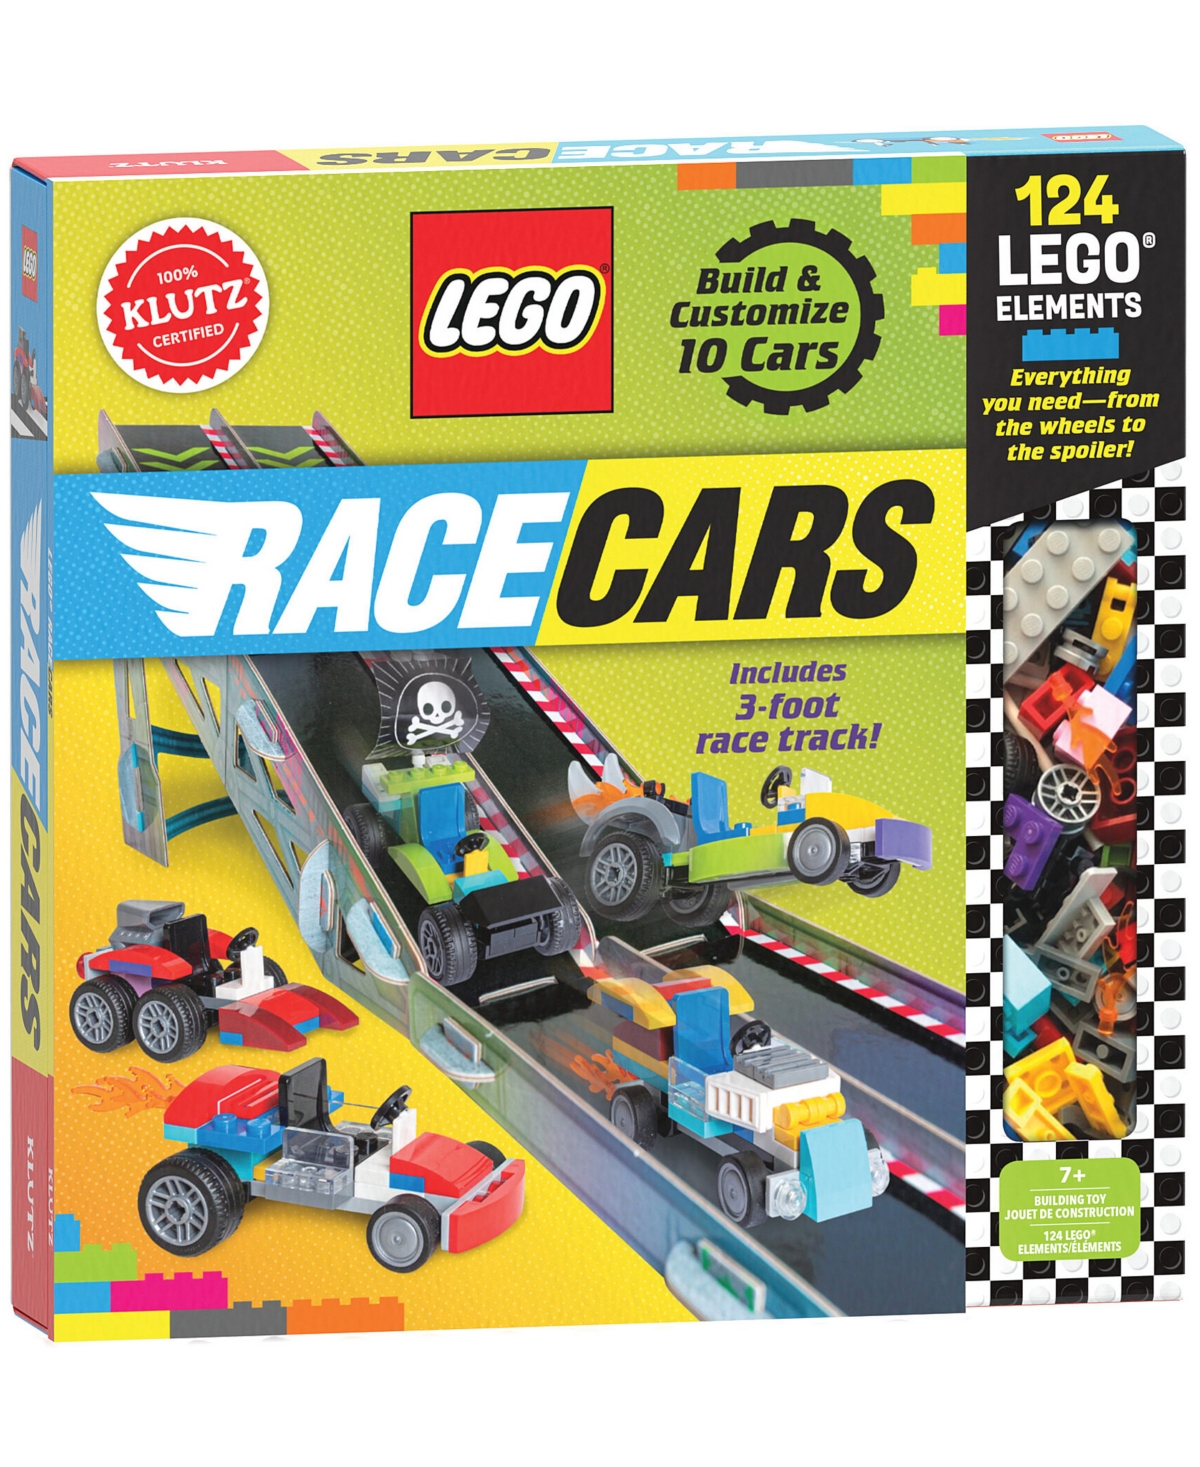 Klutz Kids' Lego Race Cars In No Color